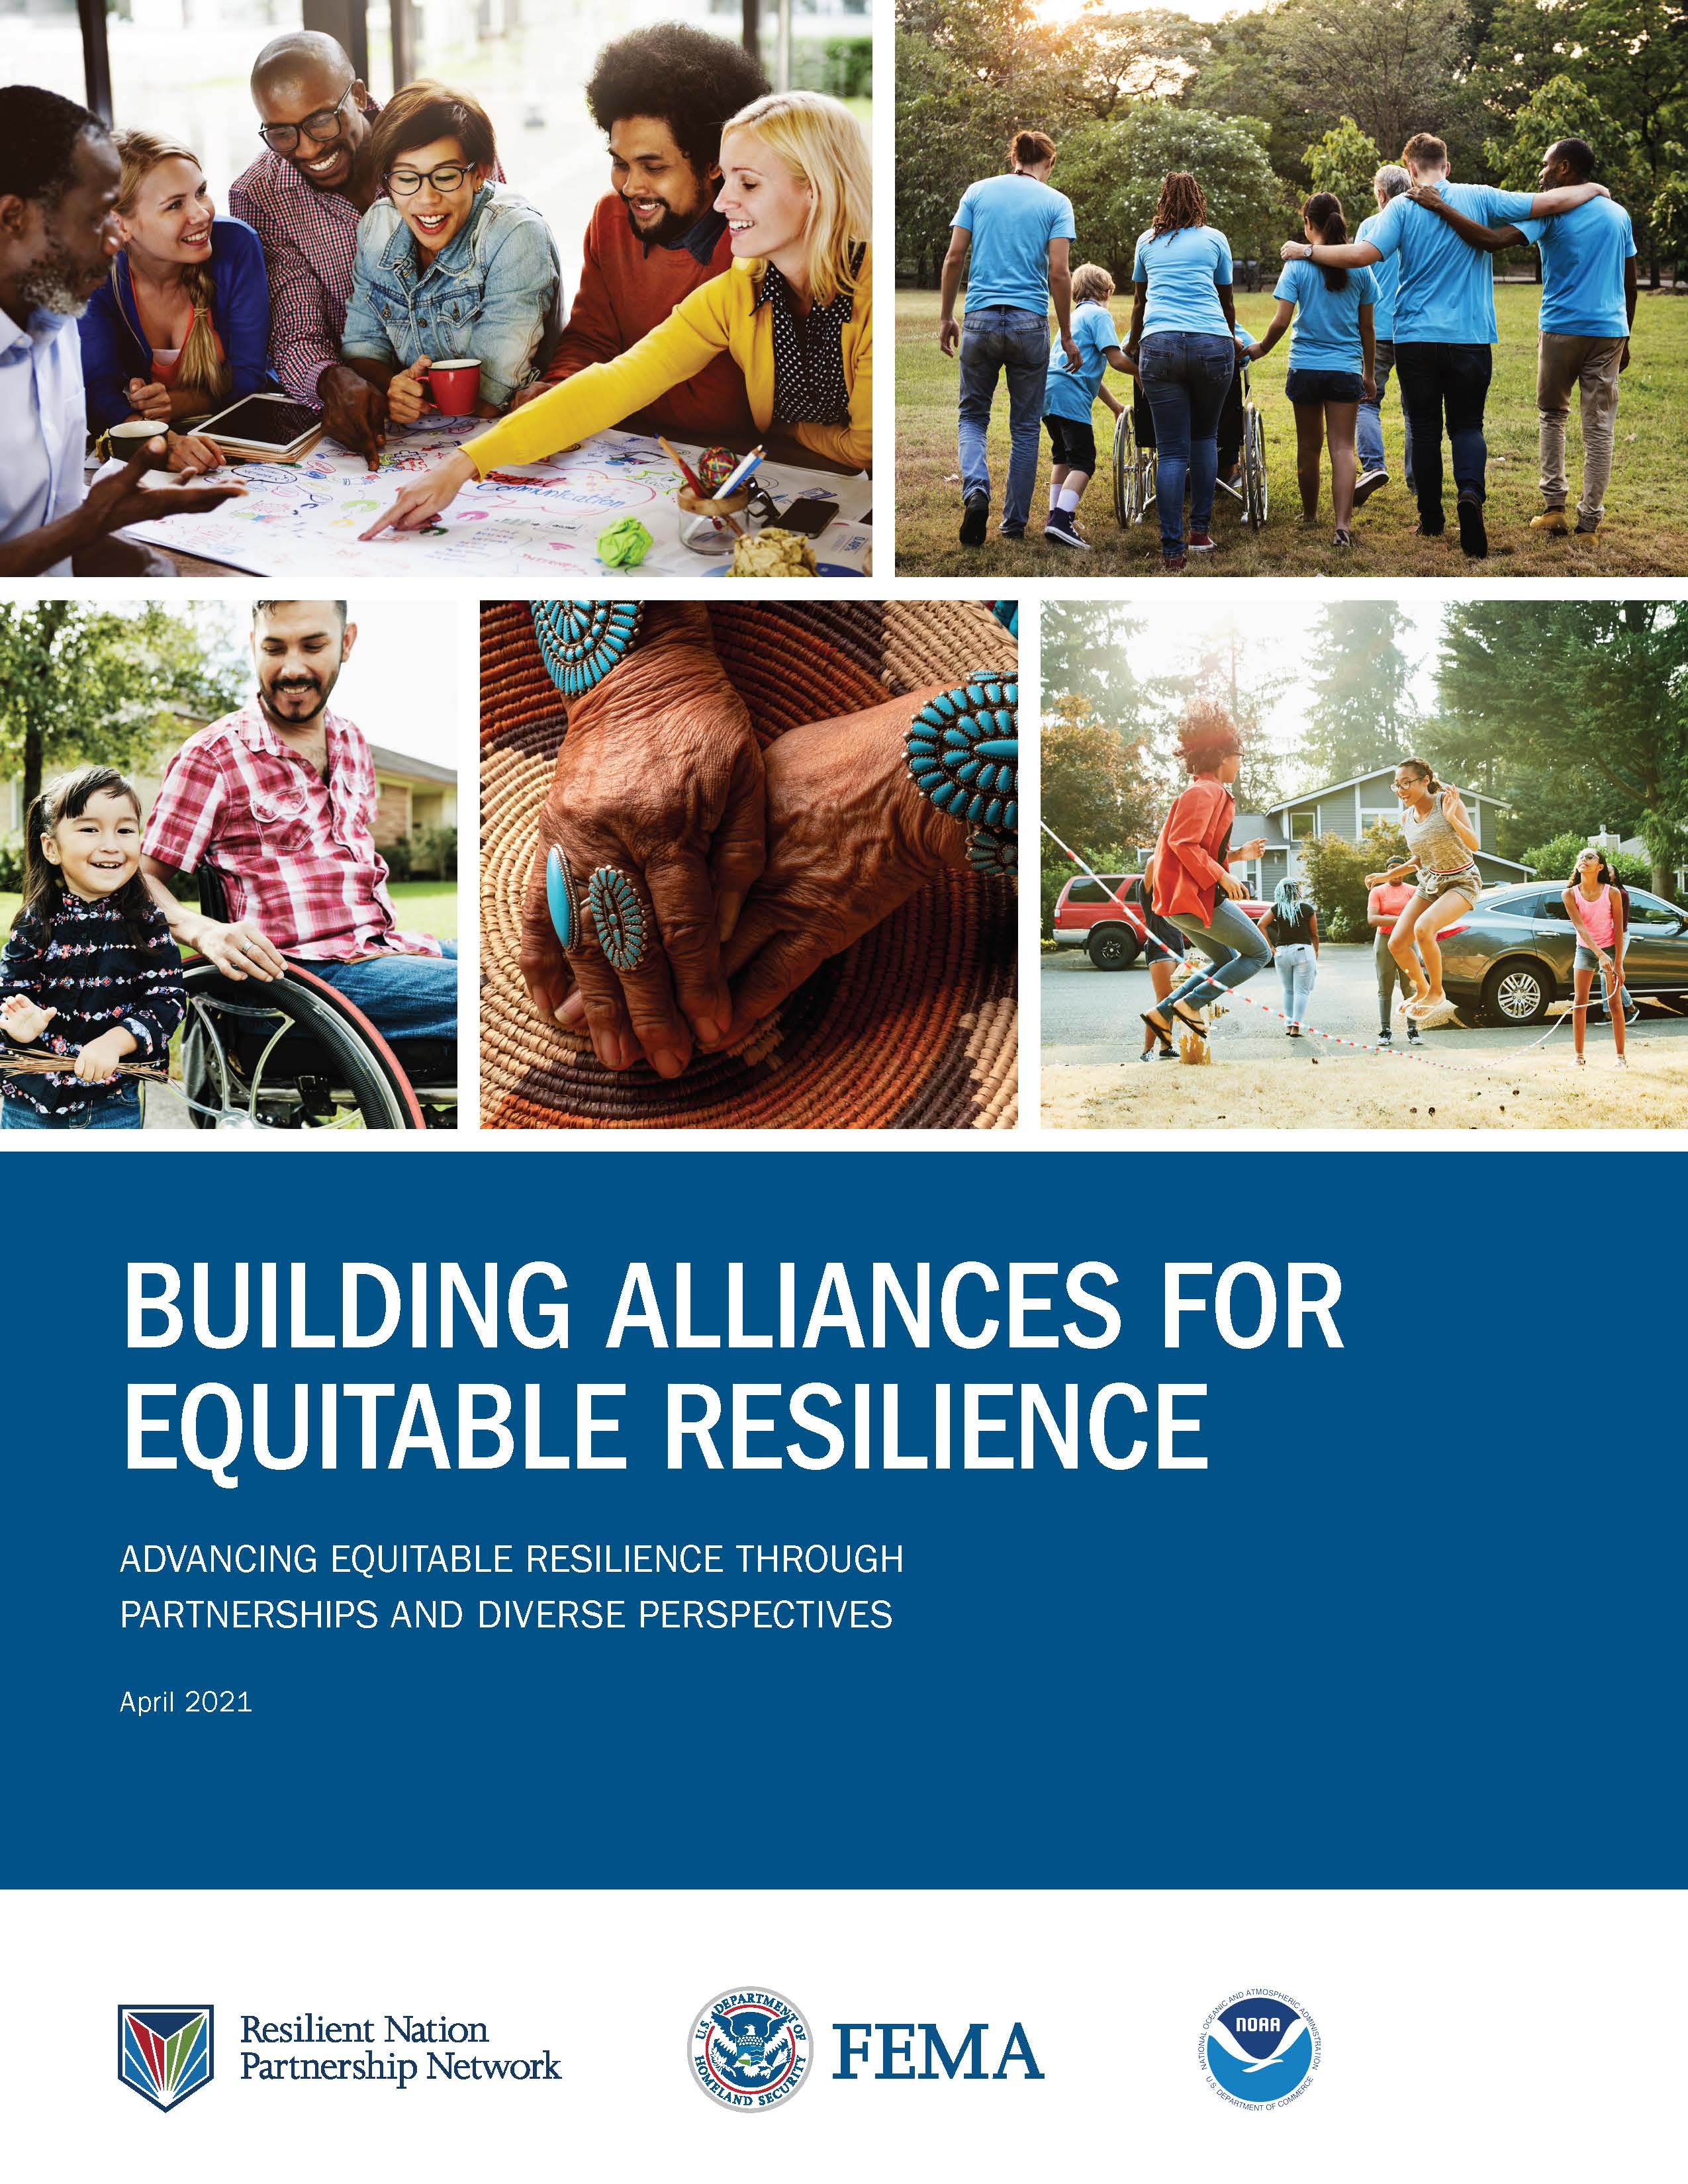 Building Alliances for Equitable Resilience frontpage.